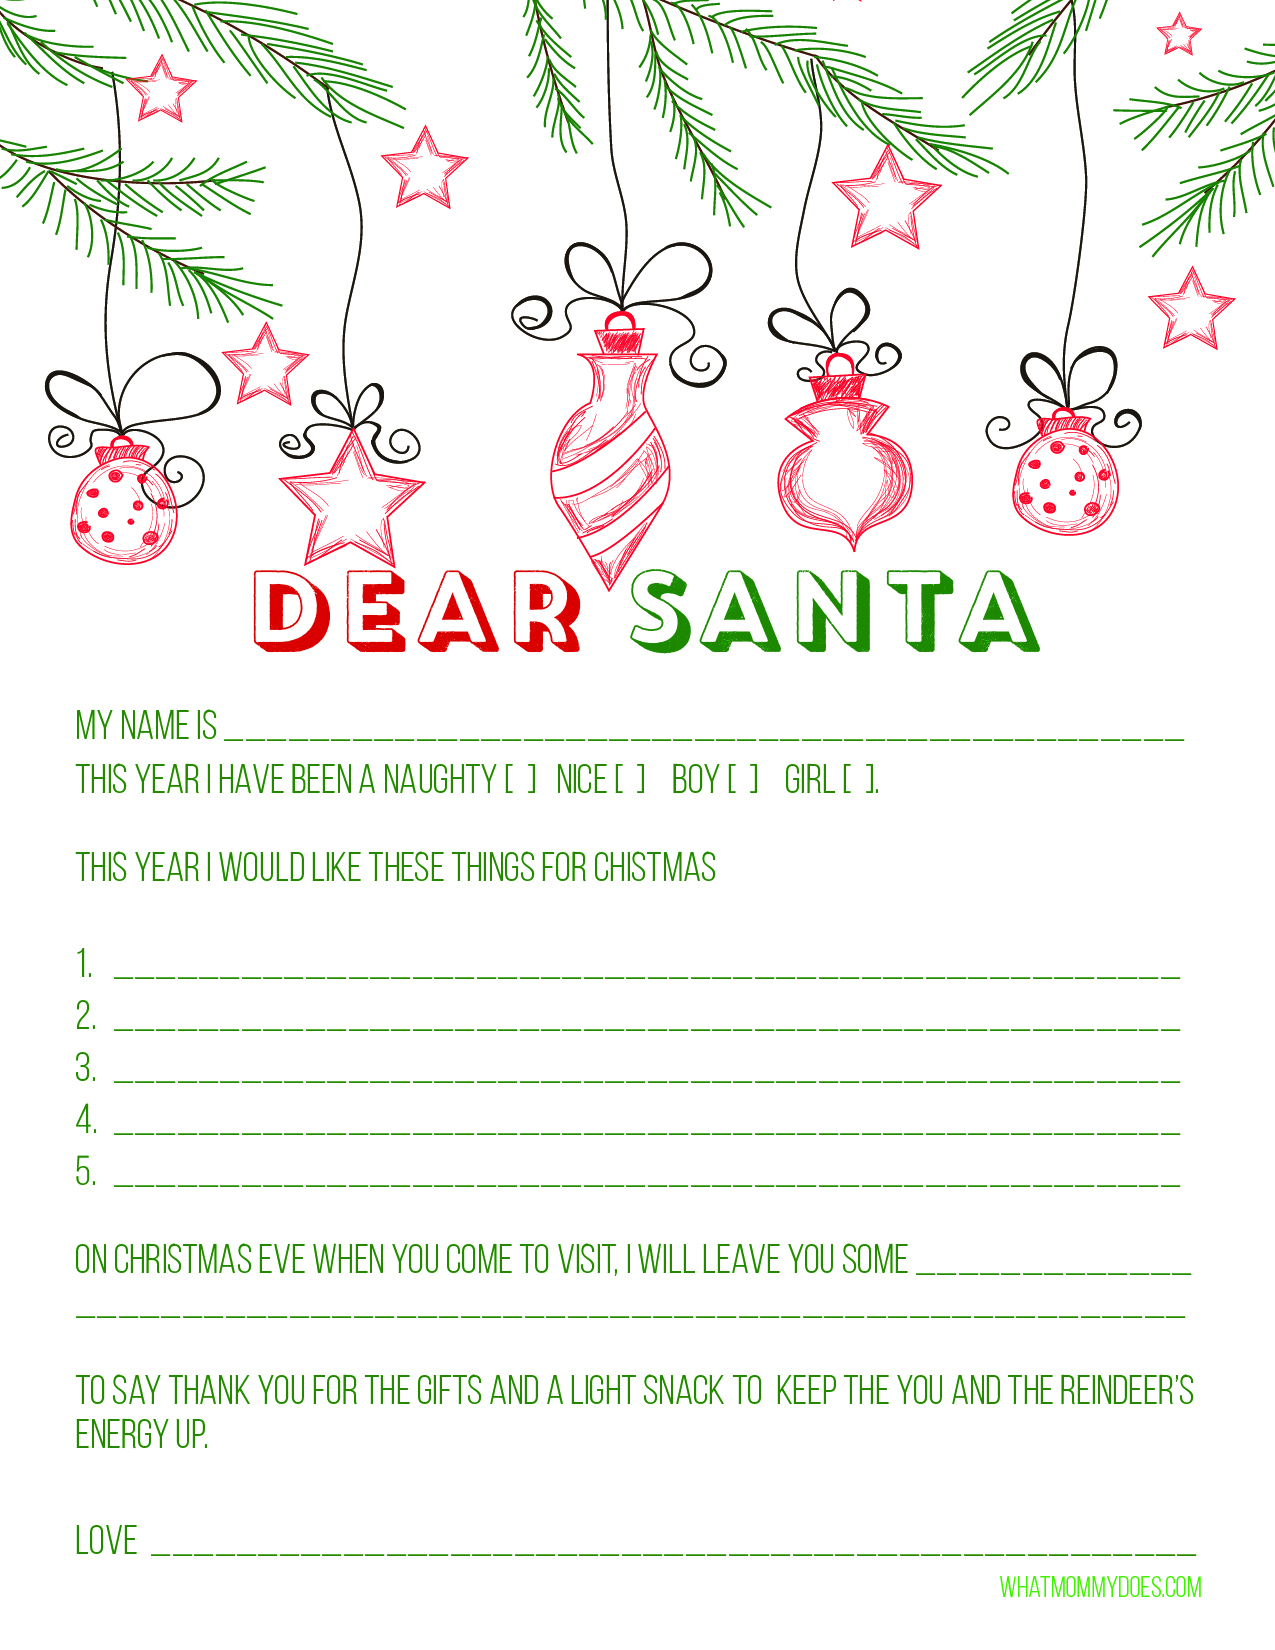 free-santa-letter-templates-how-to-mail-a-letter-to-santa-what